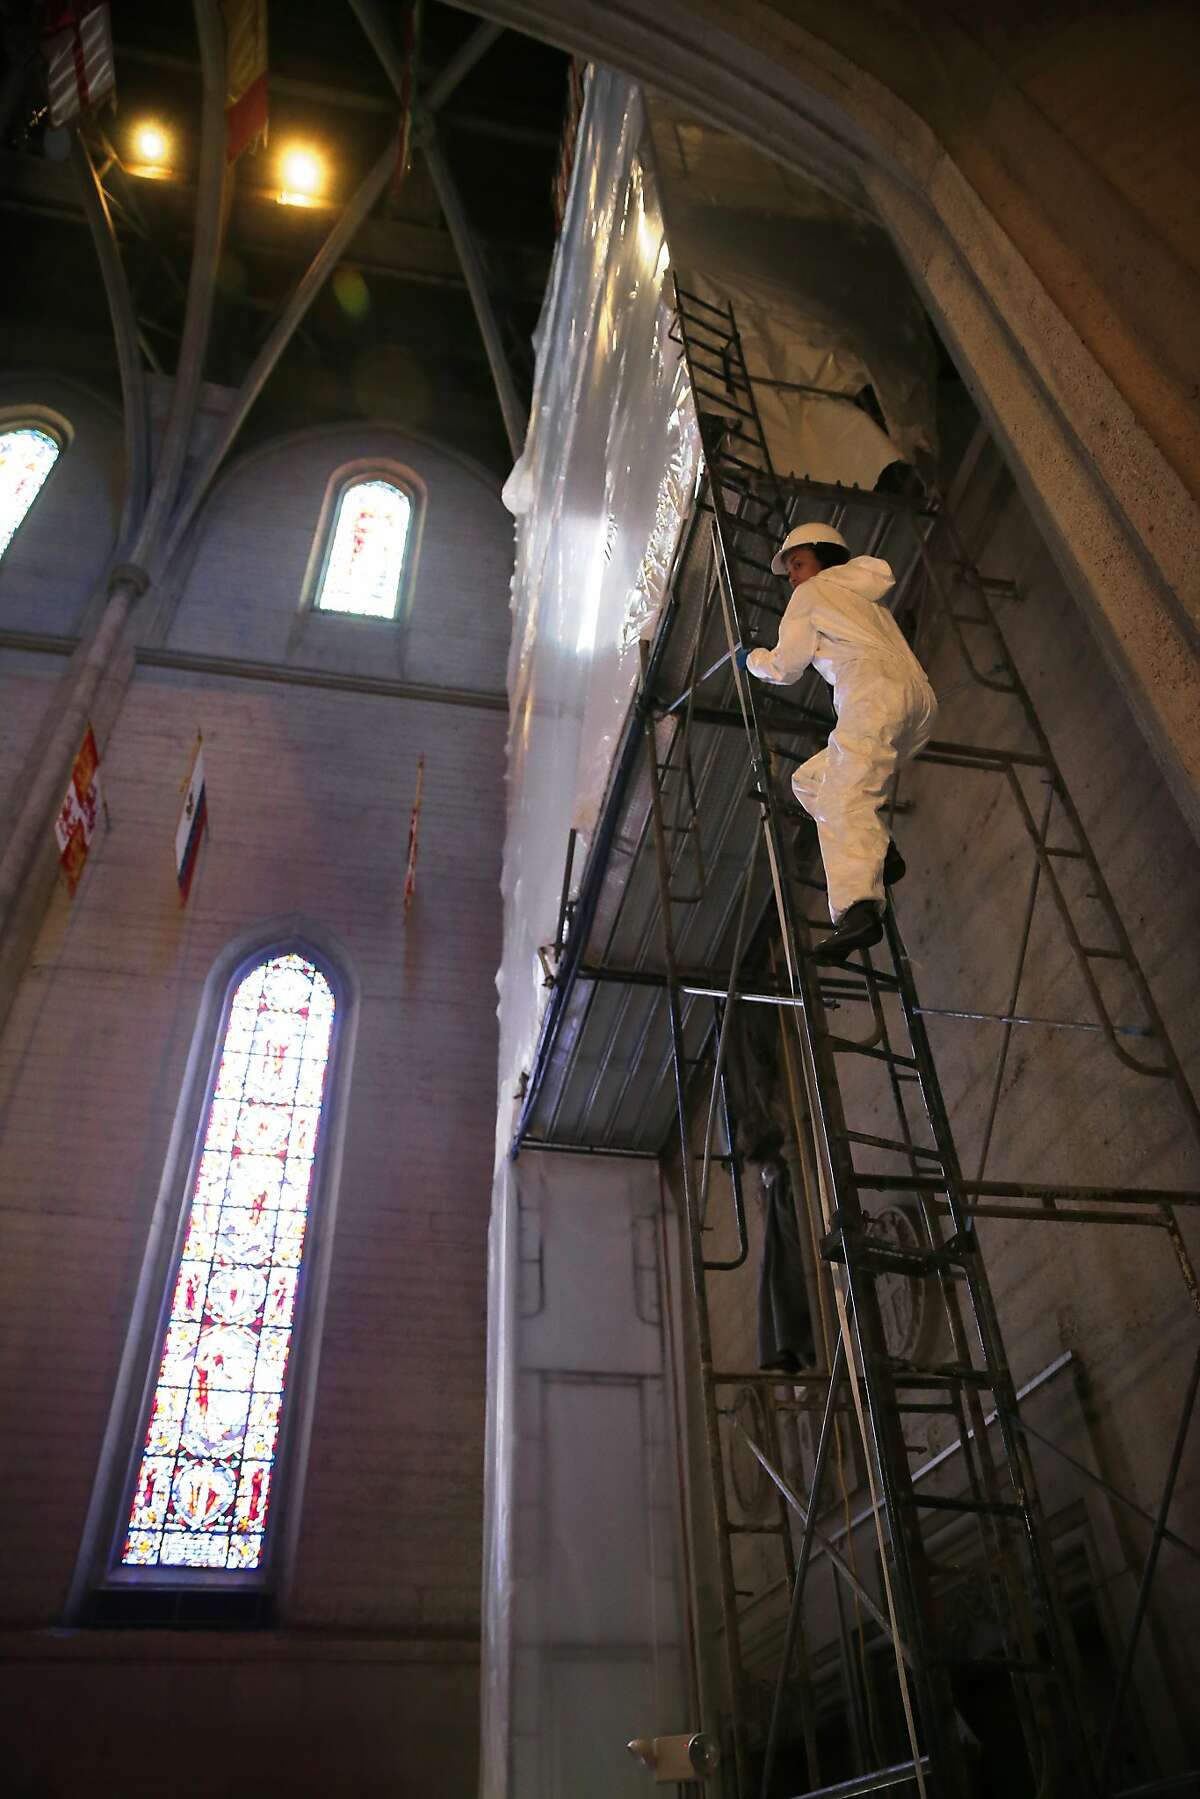 Ariana Makau, owner&principal conservator of Nzilani glass conservation climbs the scaffolding fifty feet off the ground that encases the 5,000 pieces of stained glass at Grace Cathedral in San Francisco, Calif., as seen on Fri. June 5, 2015.